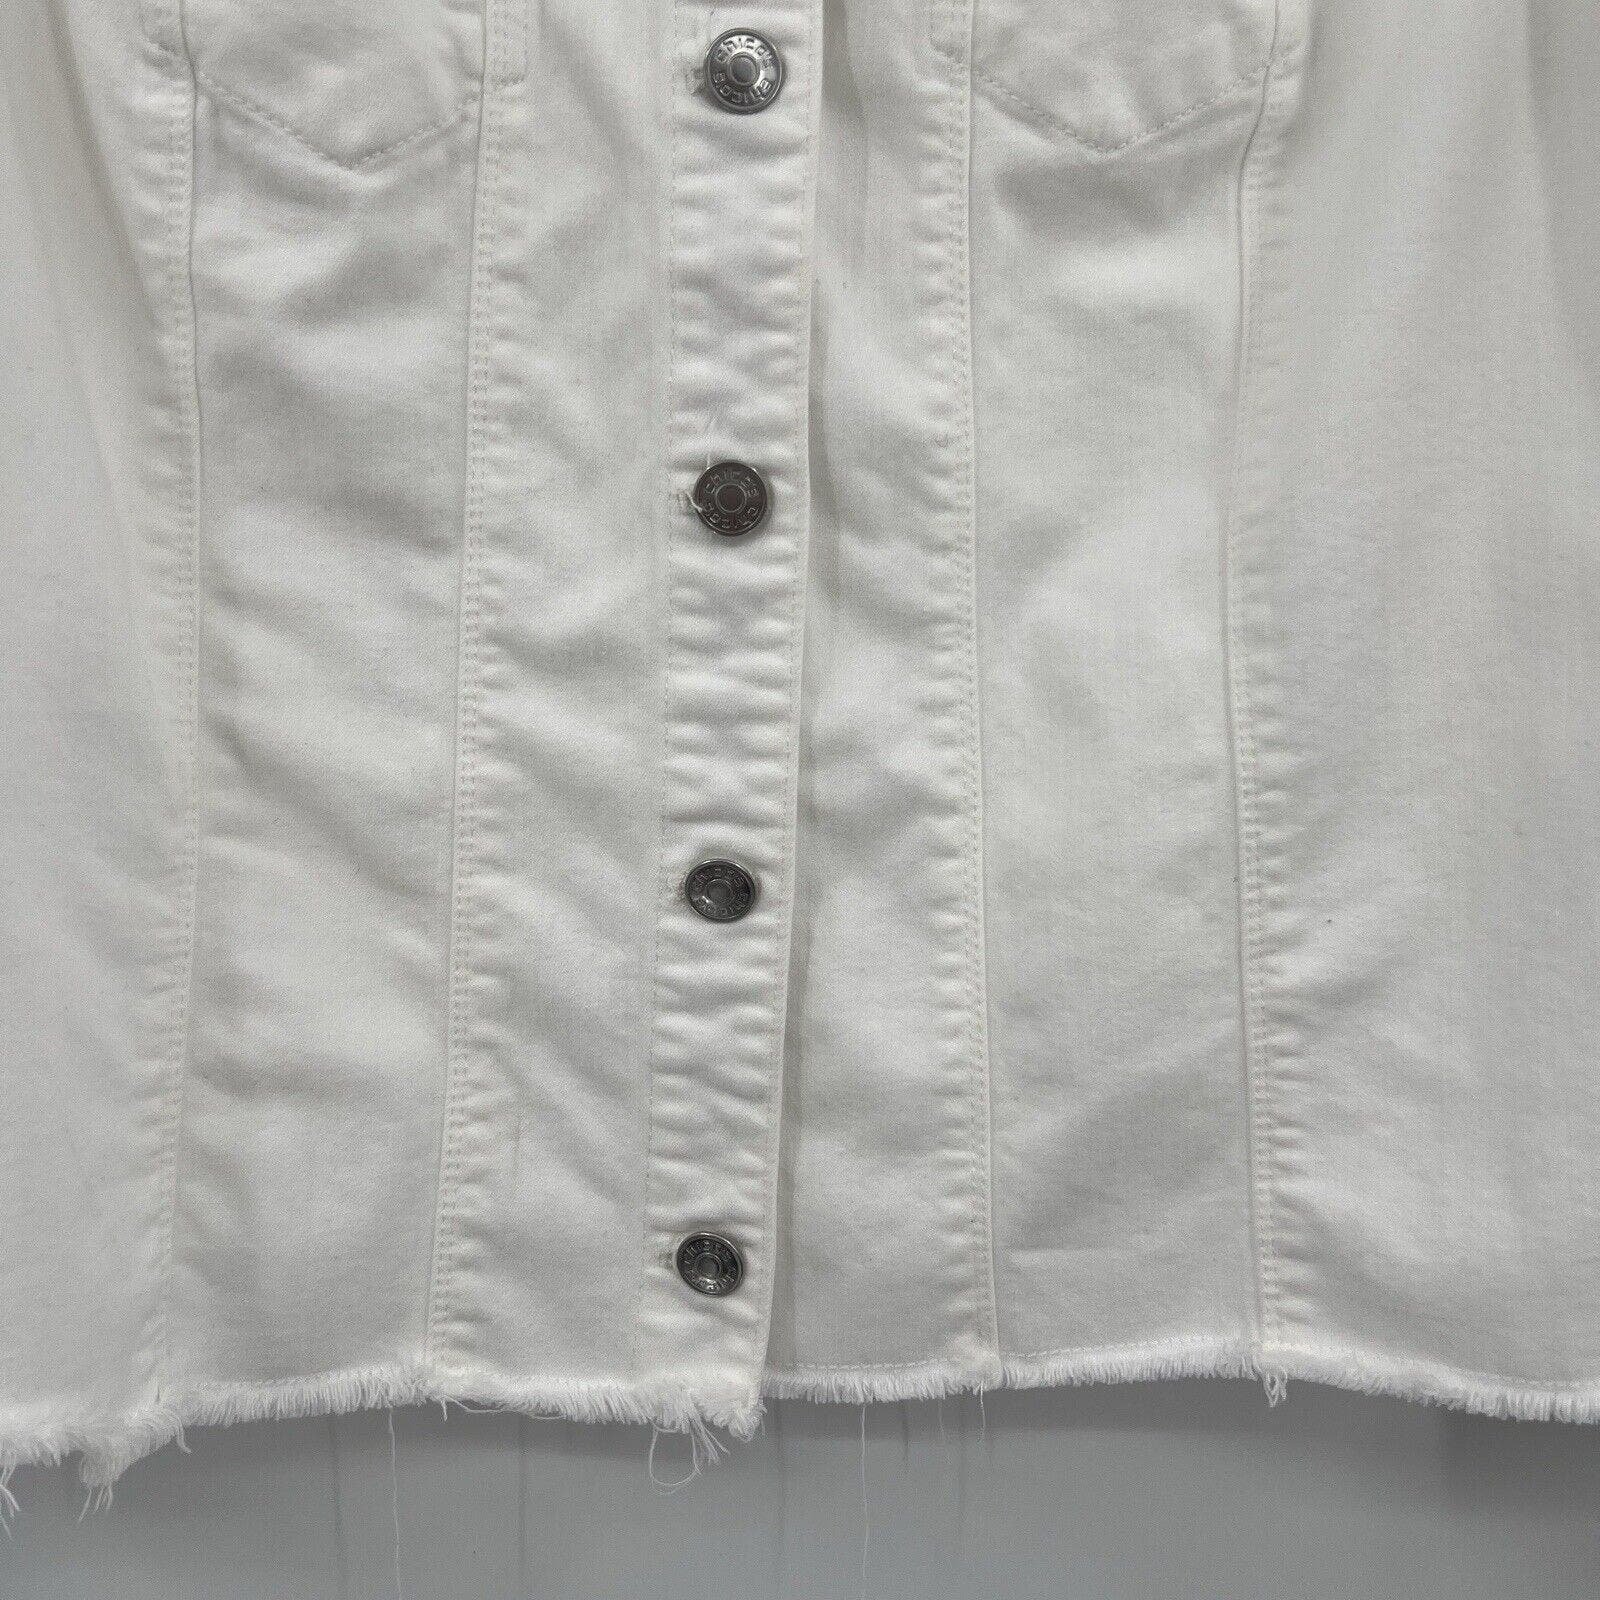 Wholesale price Chicos White Denim Jean Collared Button Up Jacket Raw Hem Size 2 Women’s Large P521cx4ic Buying Cheap